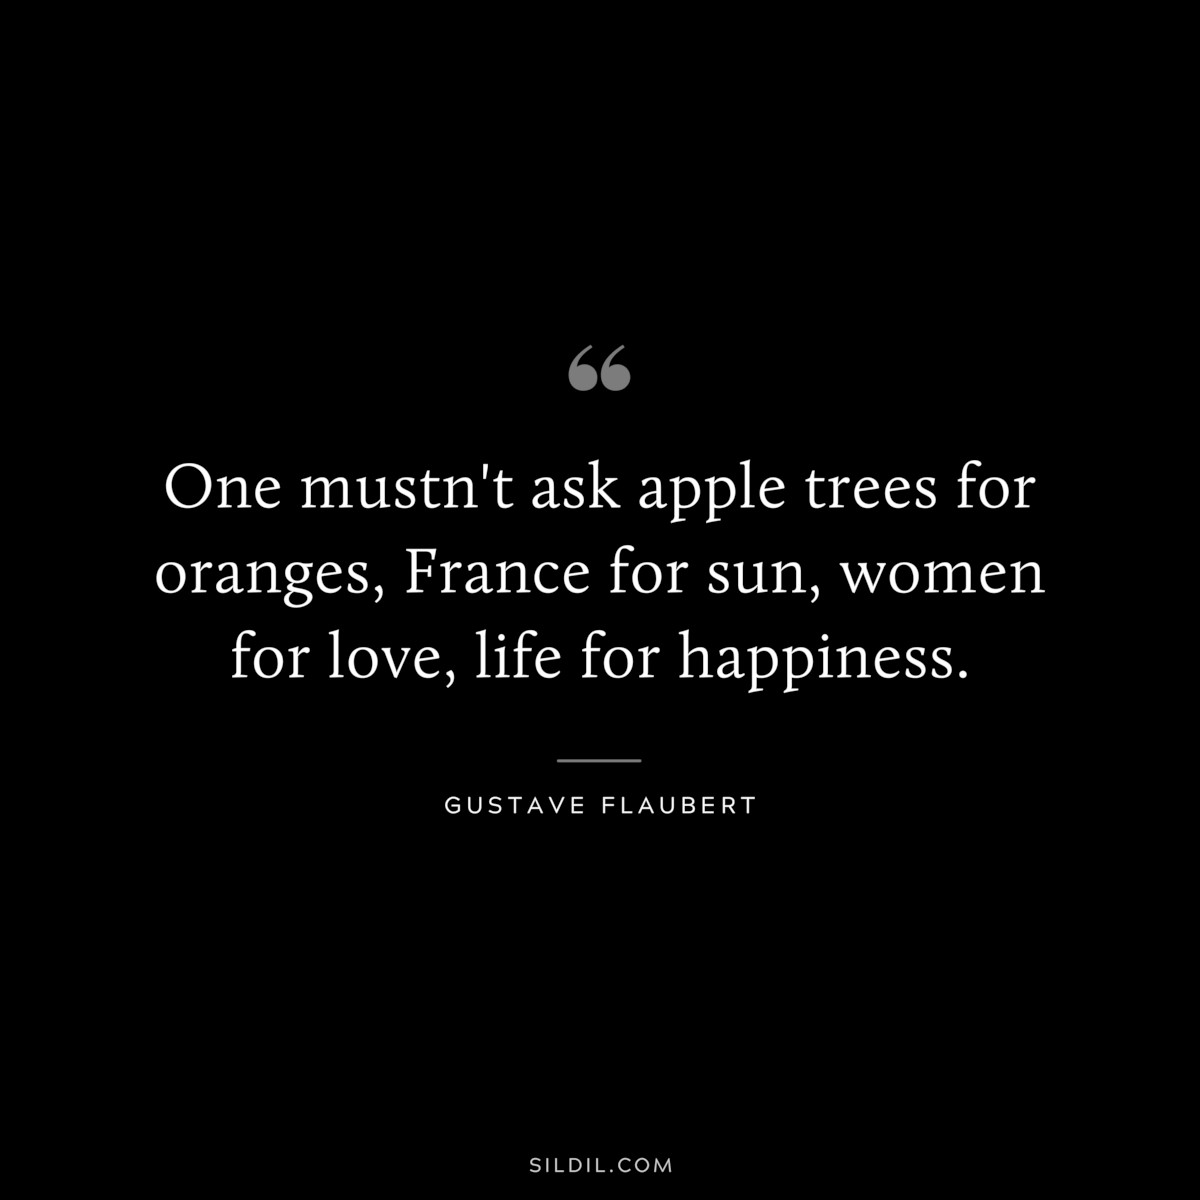 One mustn't ask apple trees for oranges, France for sun, women for love, life for happiness. ― Gustave Flaubert